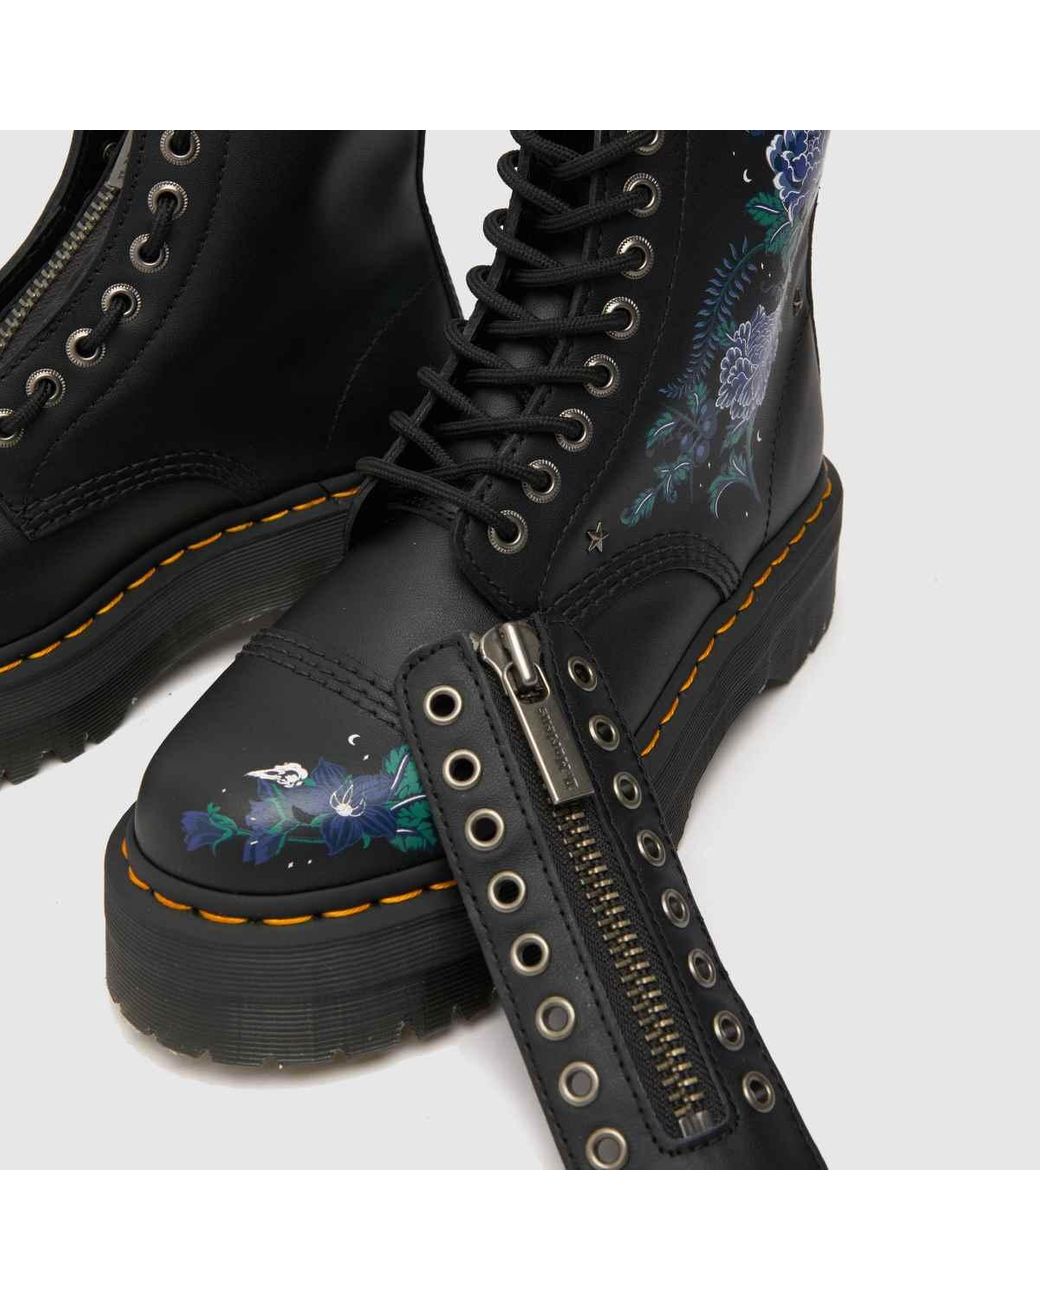 Dr. Martens 1460 Sinclair Floral Boots in Black | Lyst UK